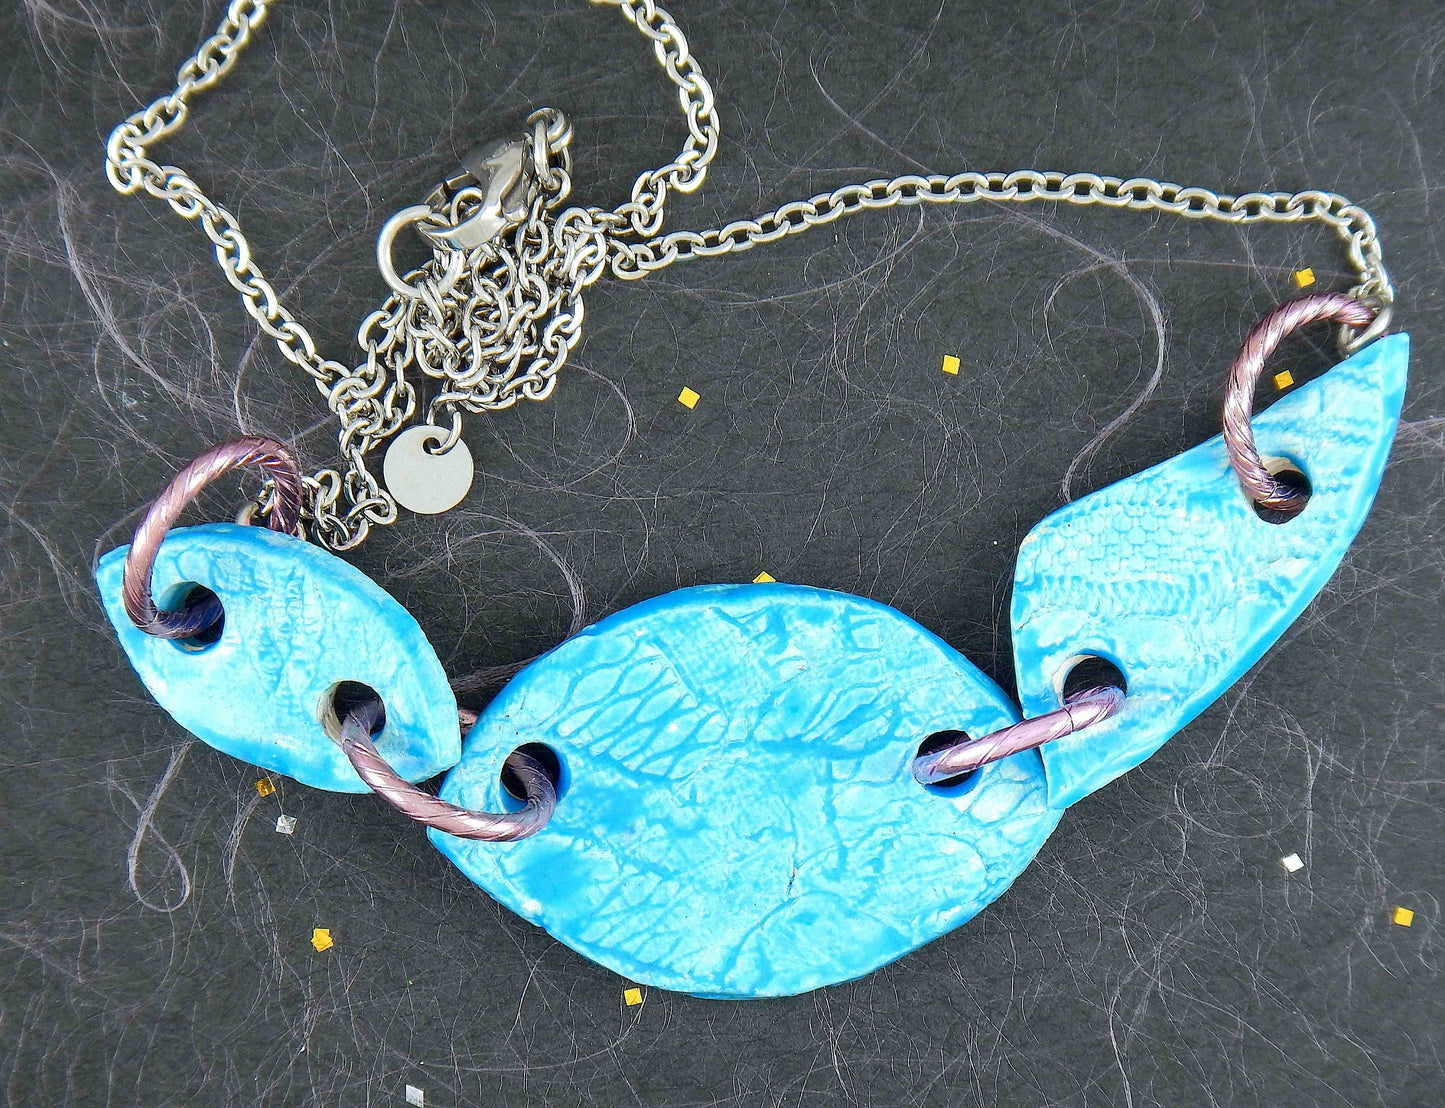 15-inch necklace with 3 turquoise ceramic pieces handmade in Montreal, lace pattern, stainless steel chain